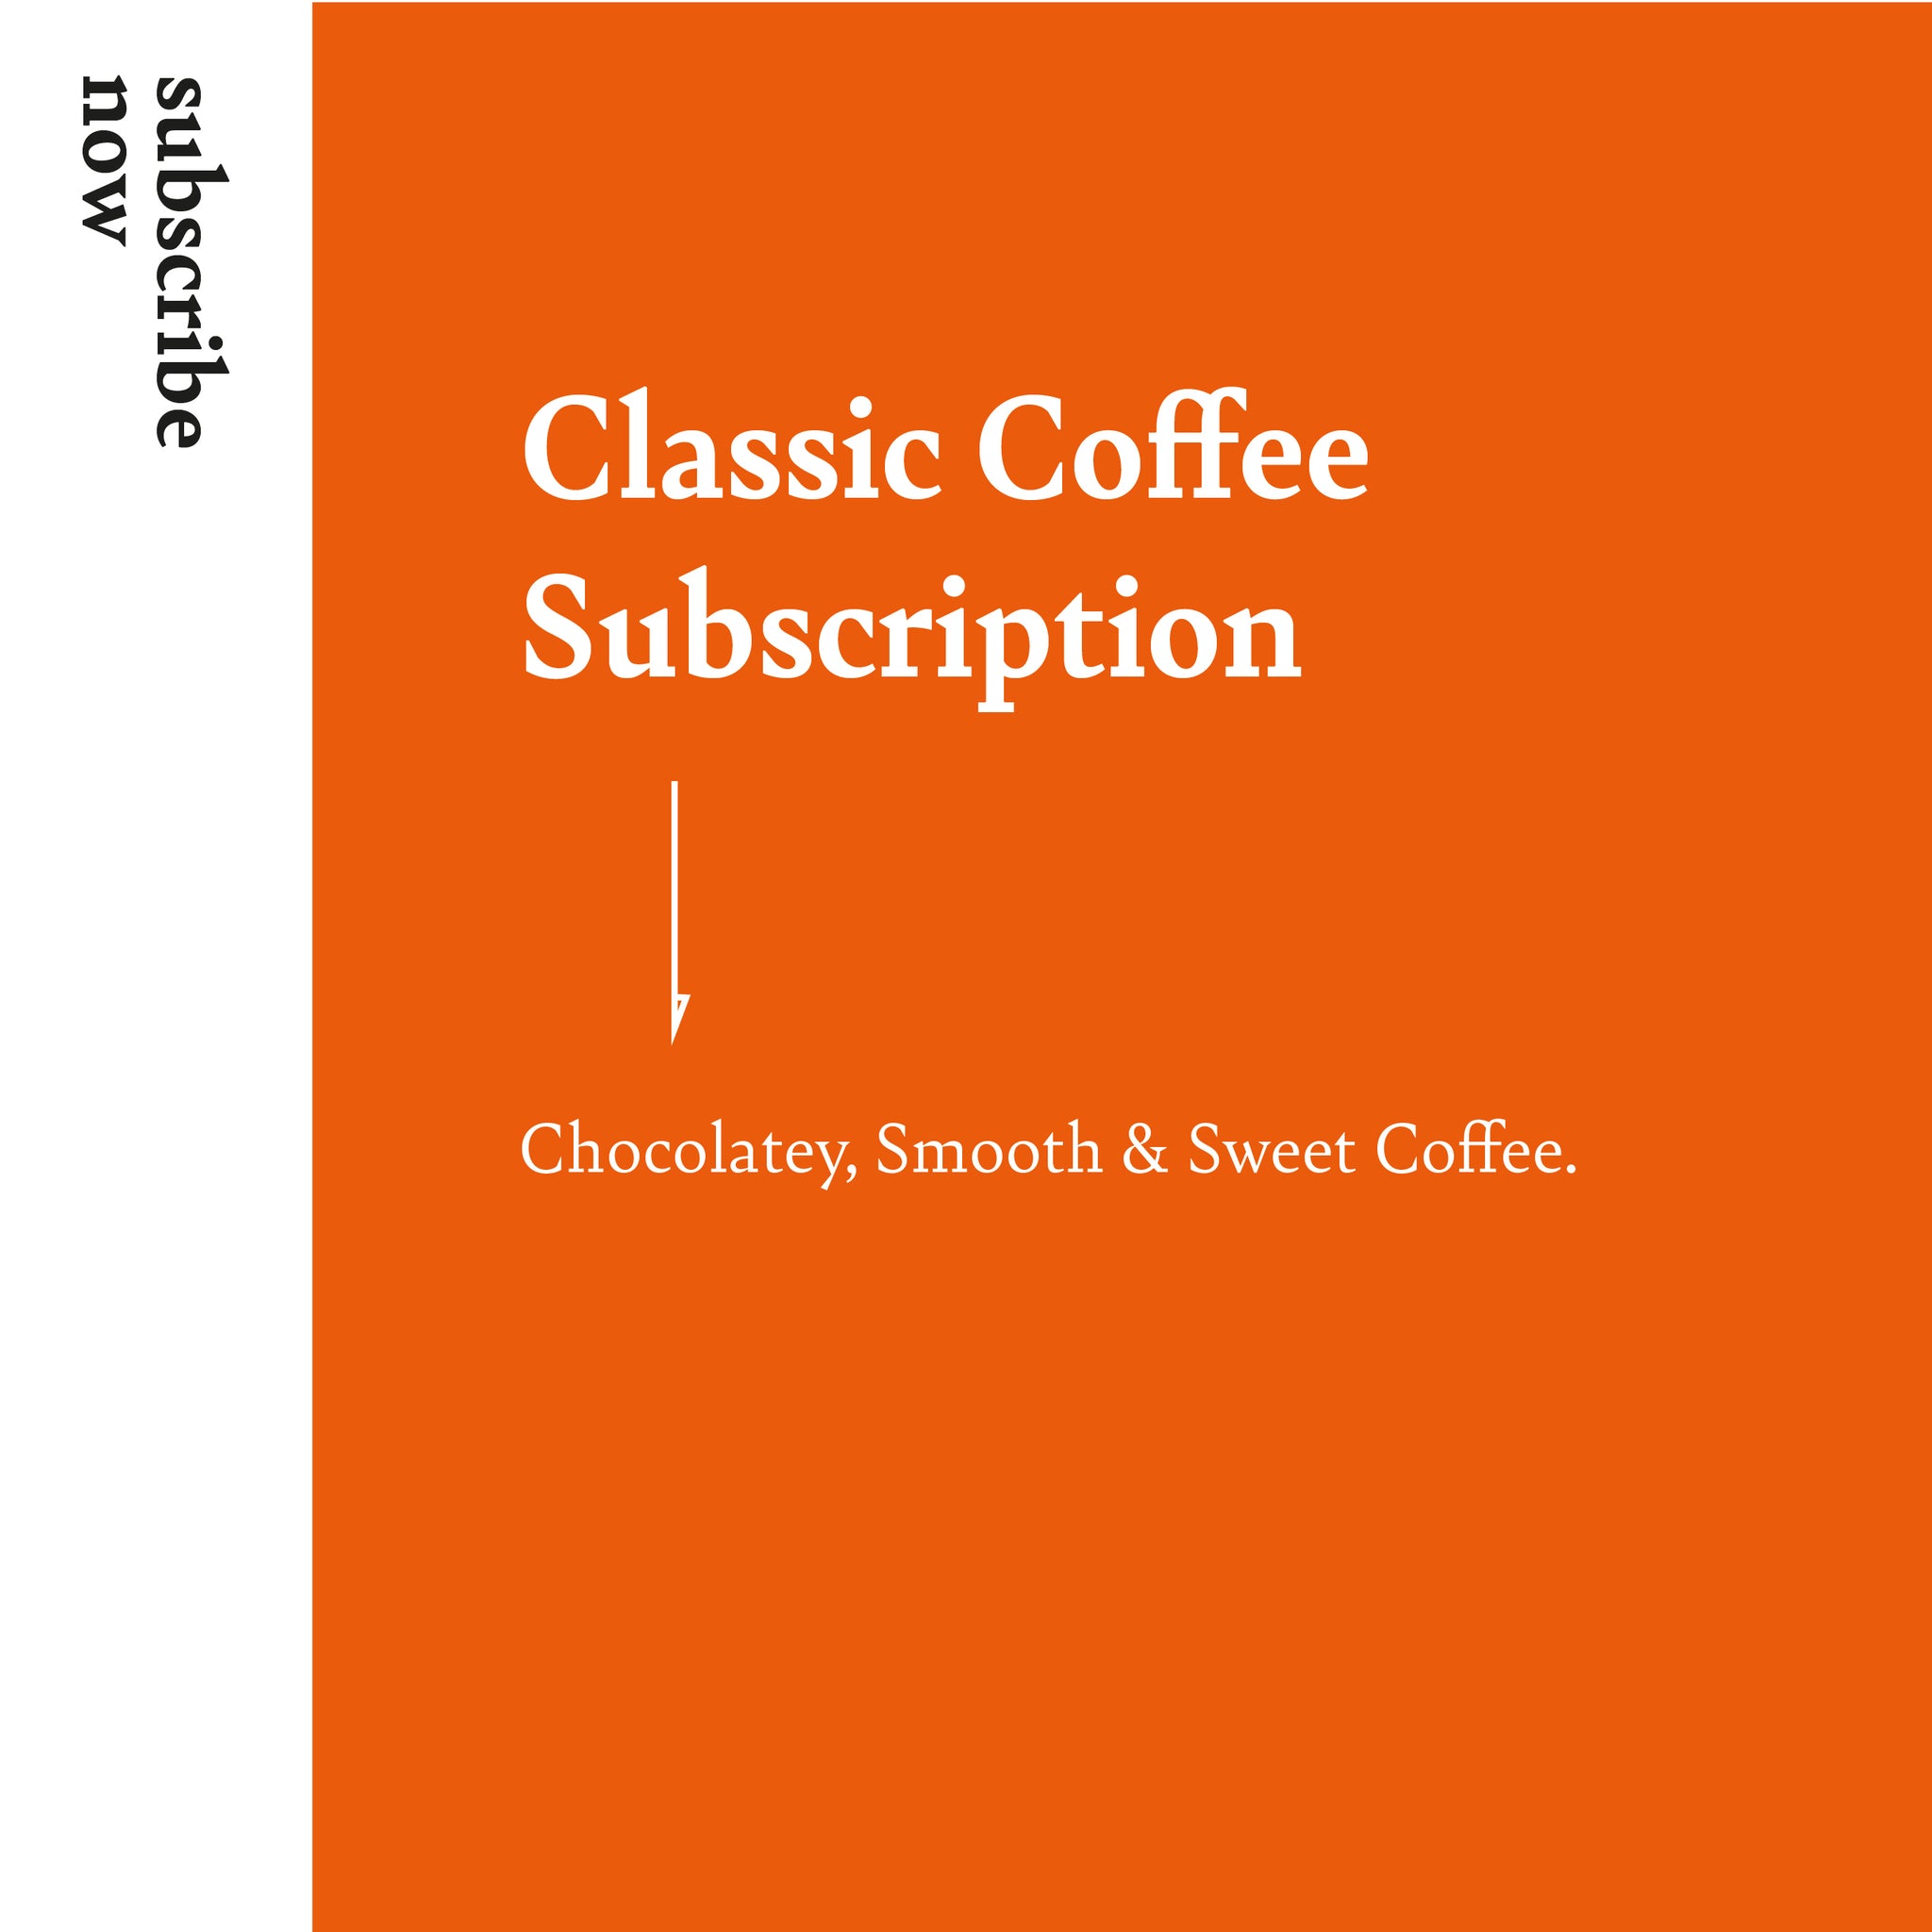 Classic Coffee Subscription